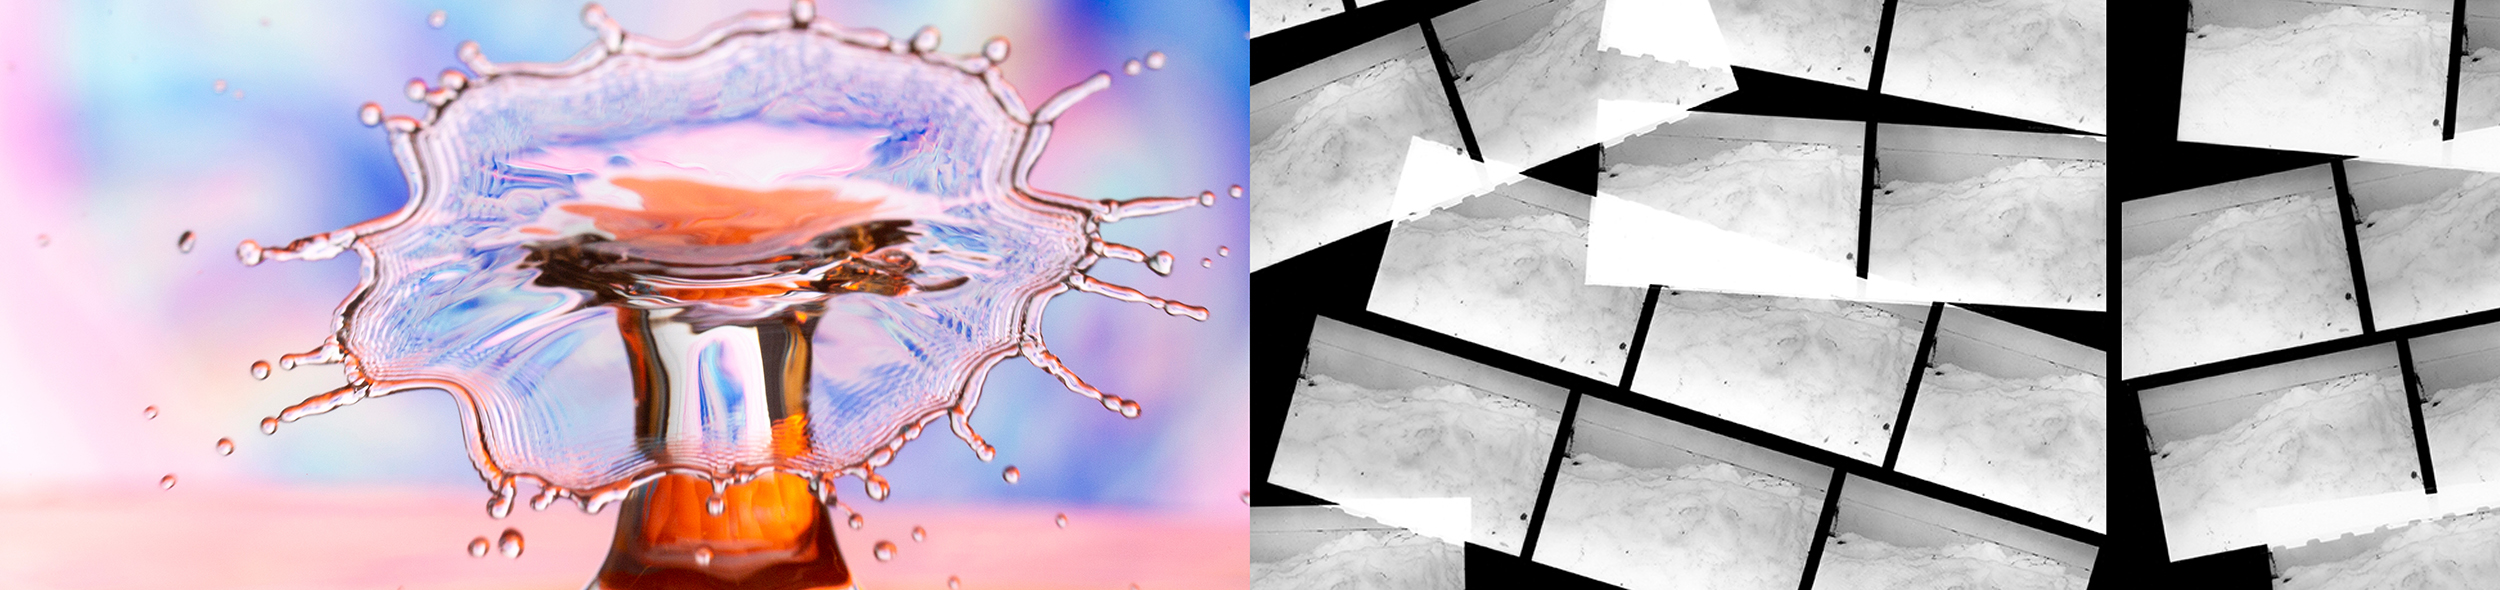 Side-by-side images of a high-speed water drop and negative prints.